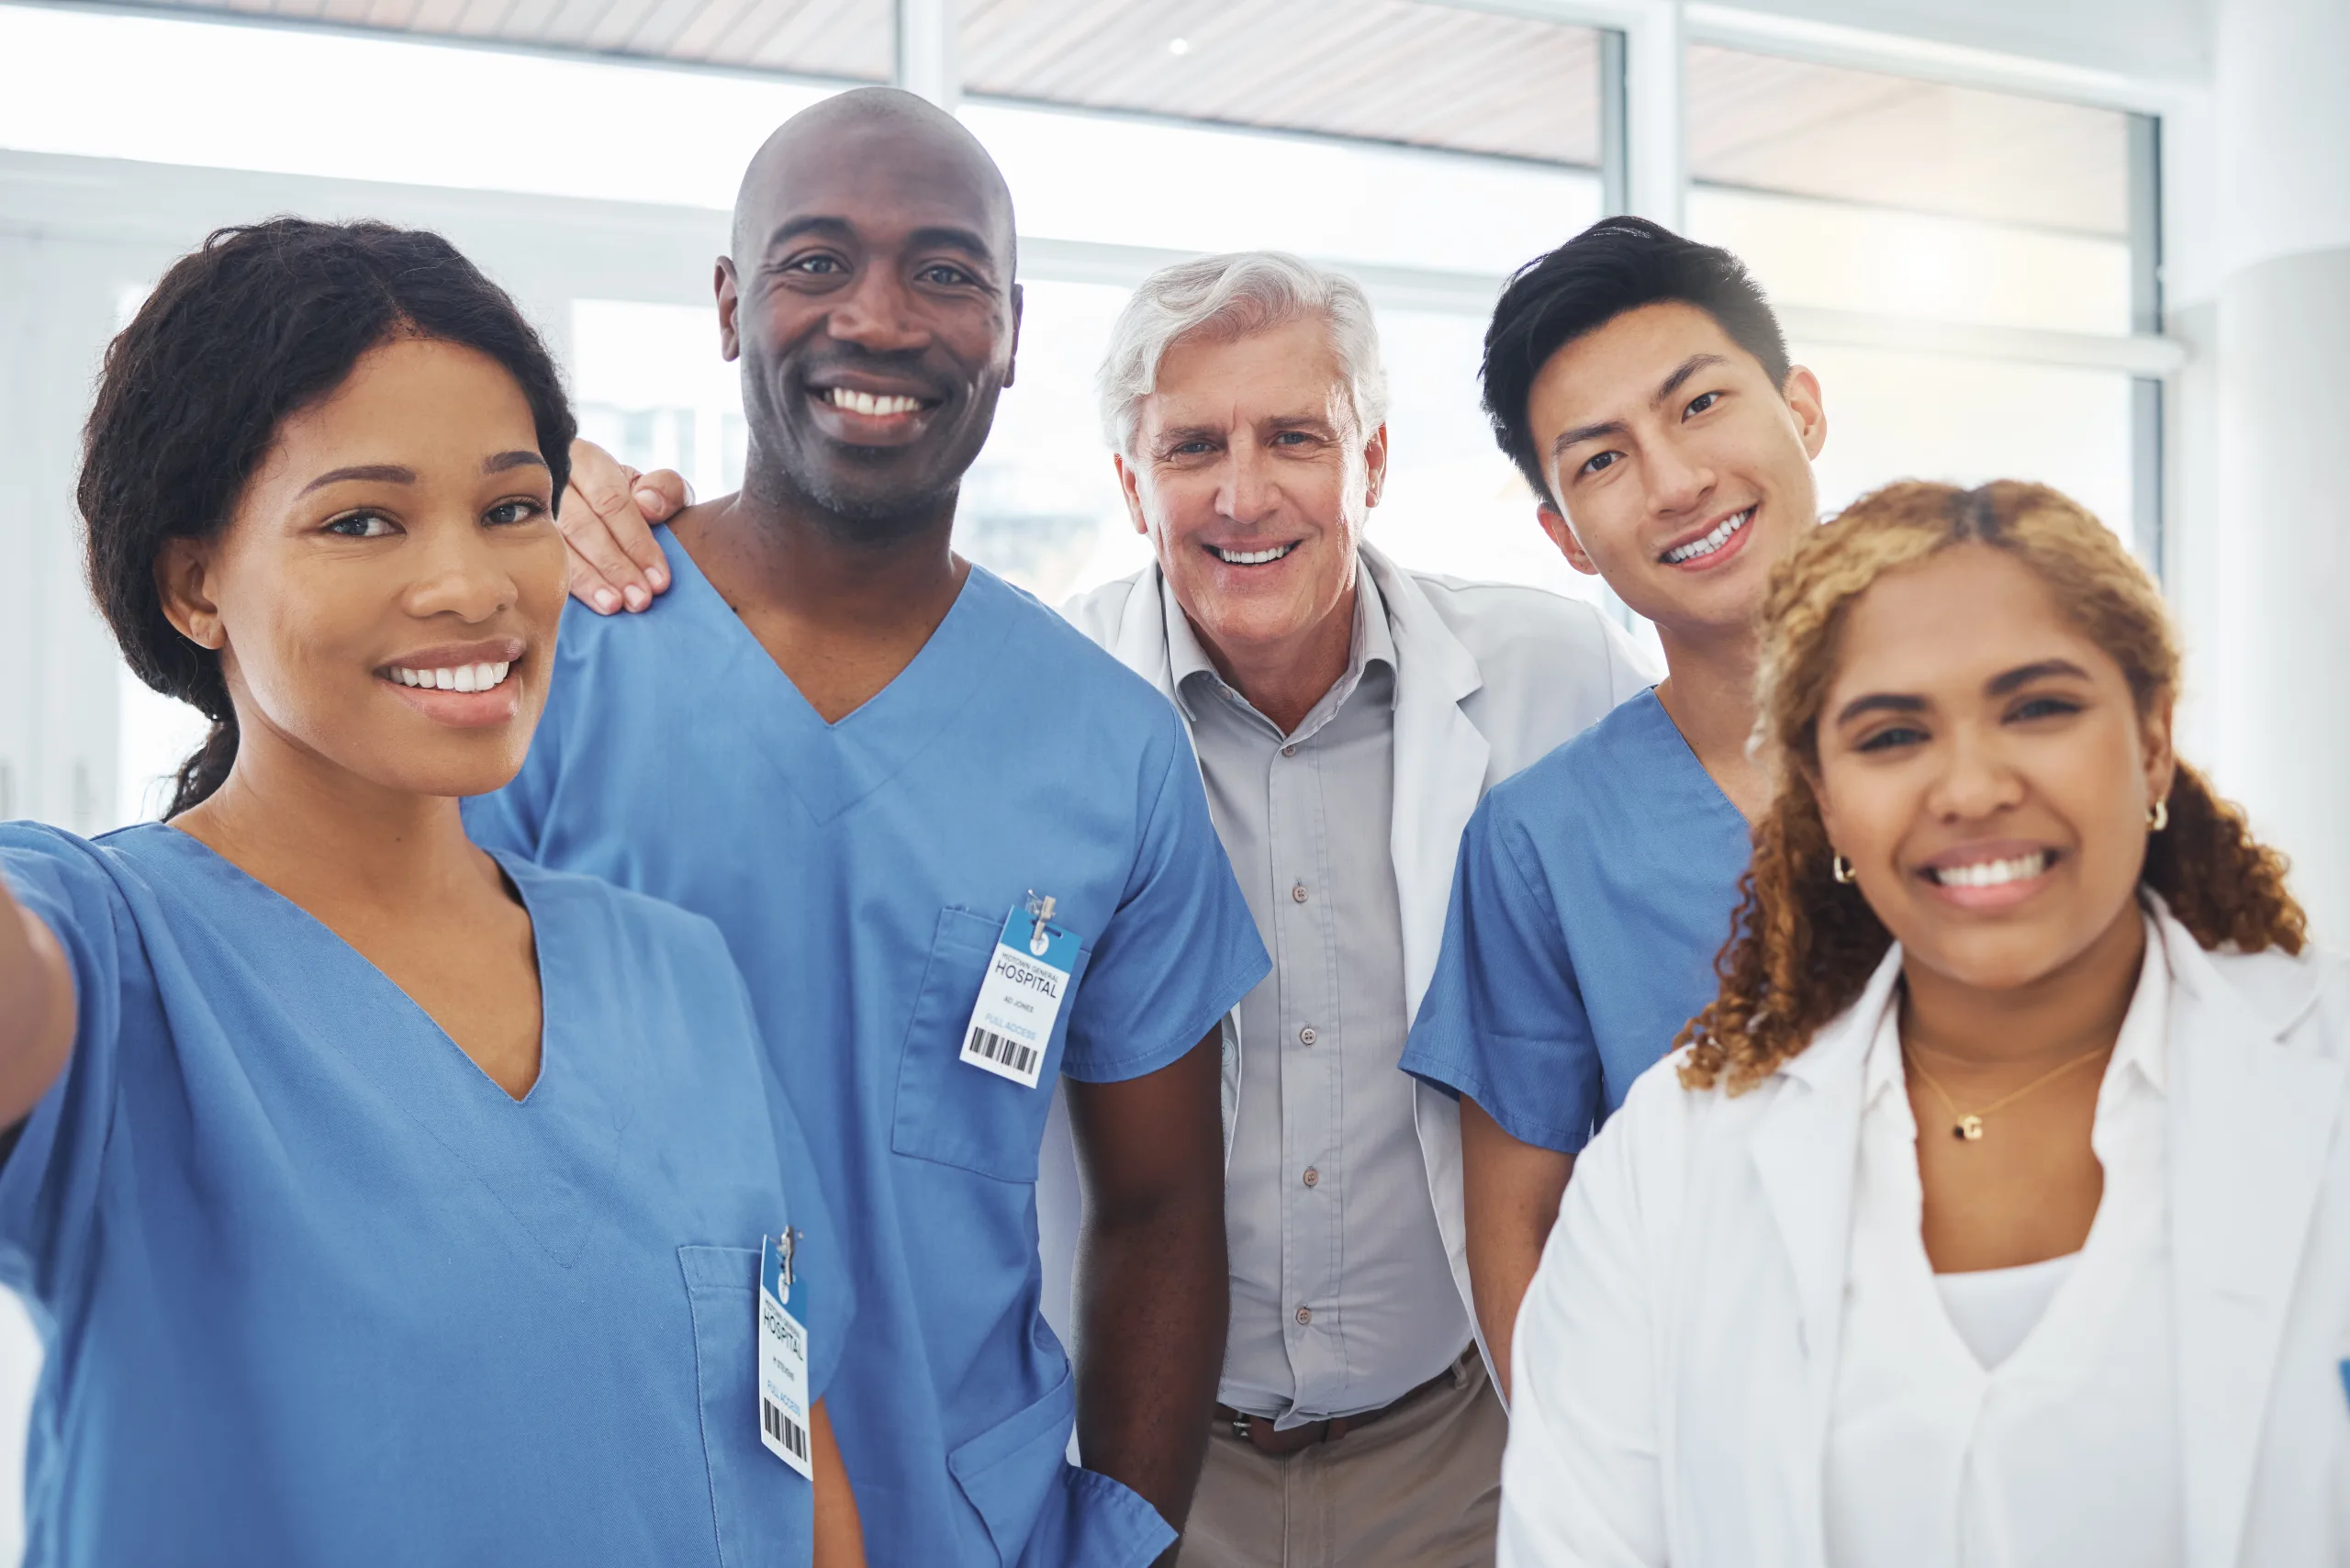 Portrait of a group of medical practitioners smiling together in a hospital